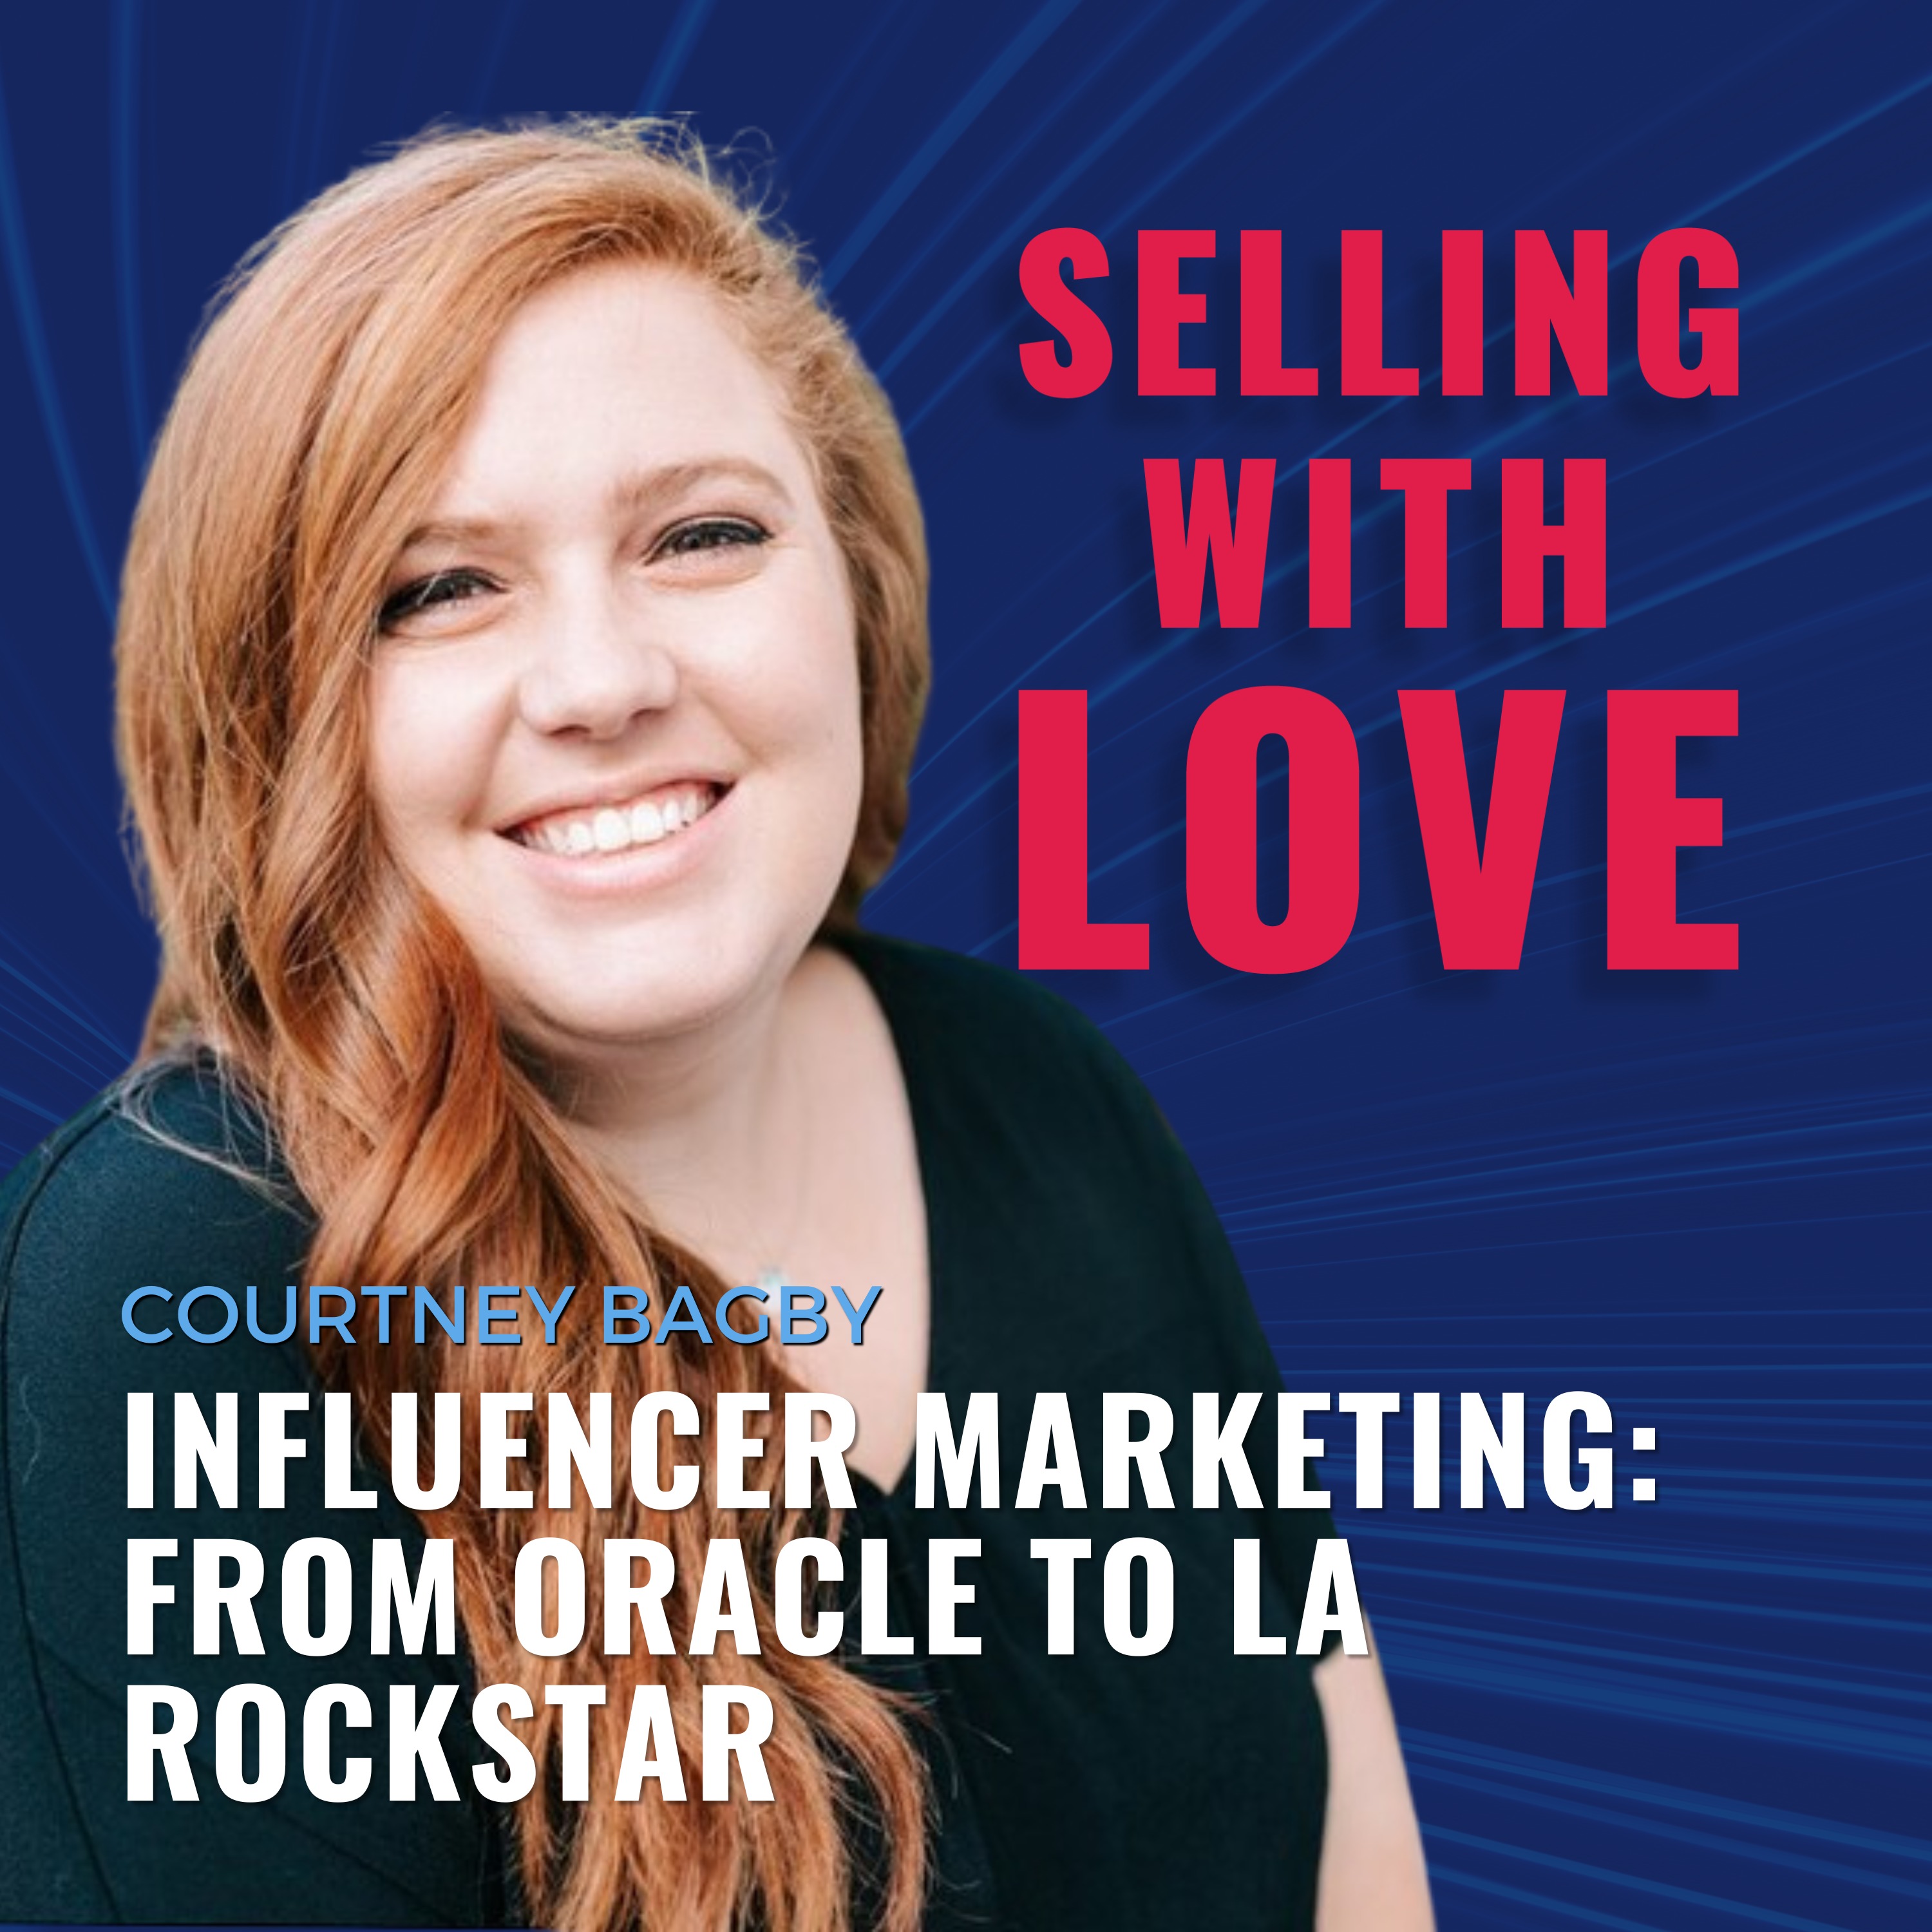 Influencer Marketing: From Oracle to LA Rockstar